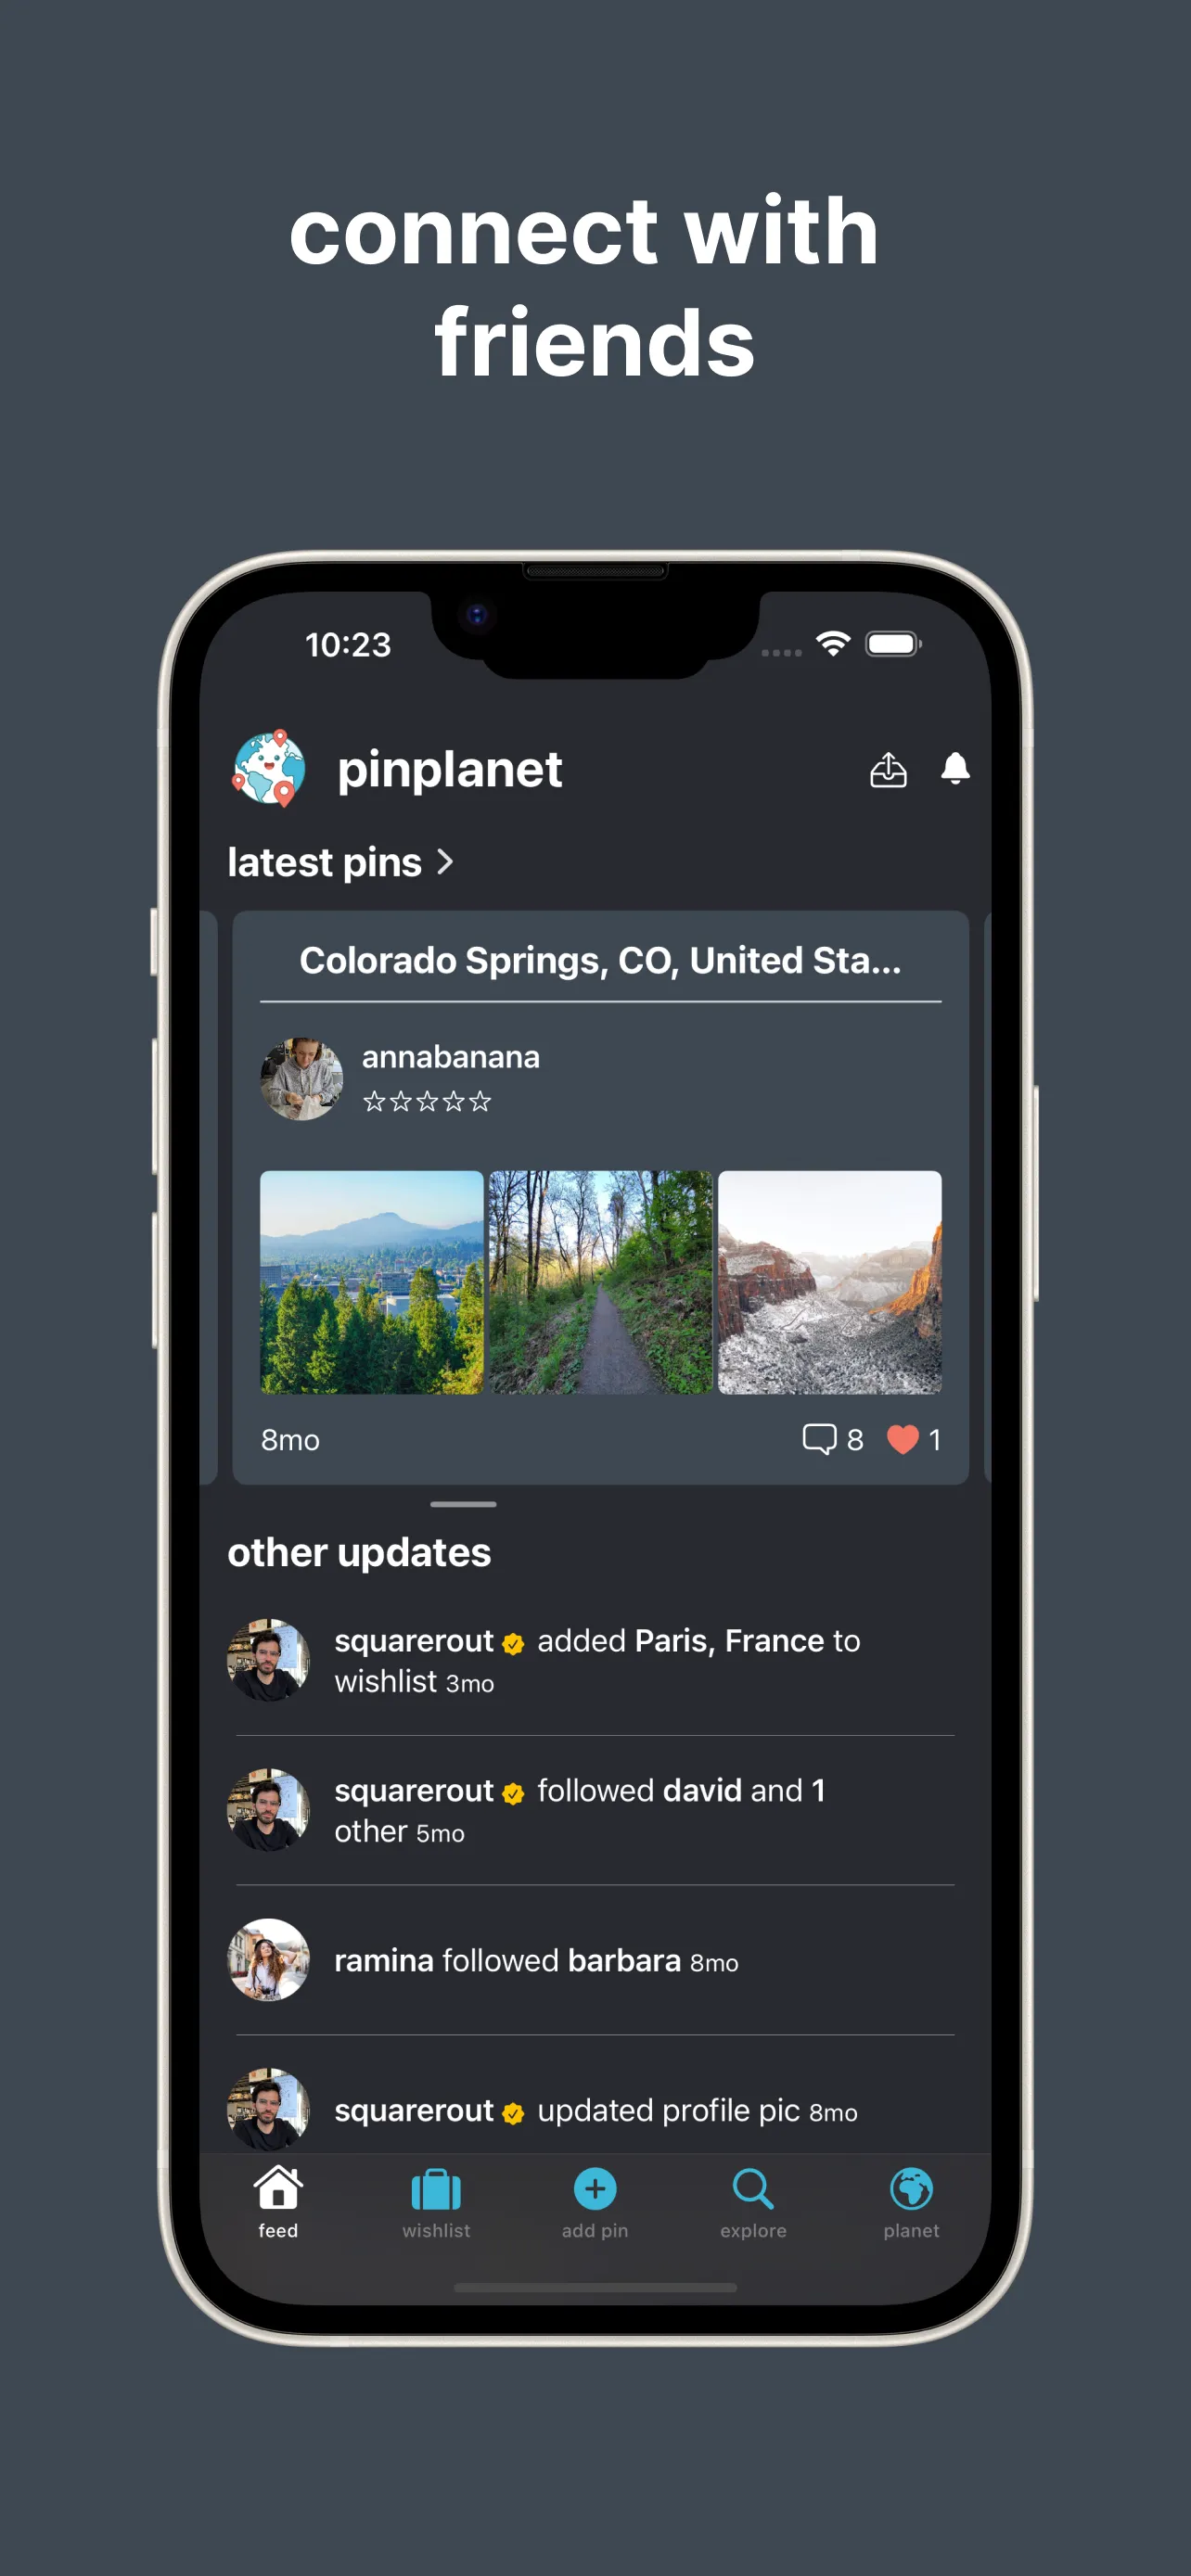 Connect with friends; Feed view that shows friends pins, photos, likes, comments, and general activity.